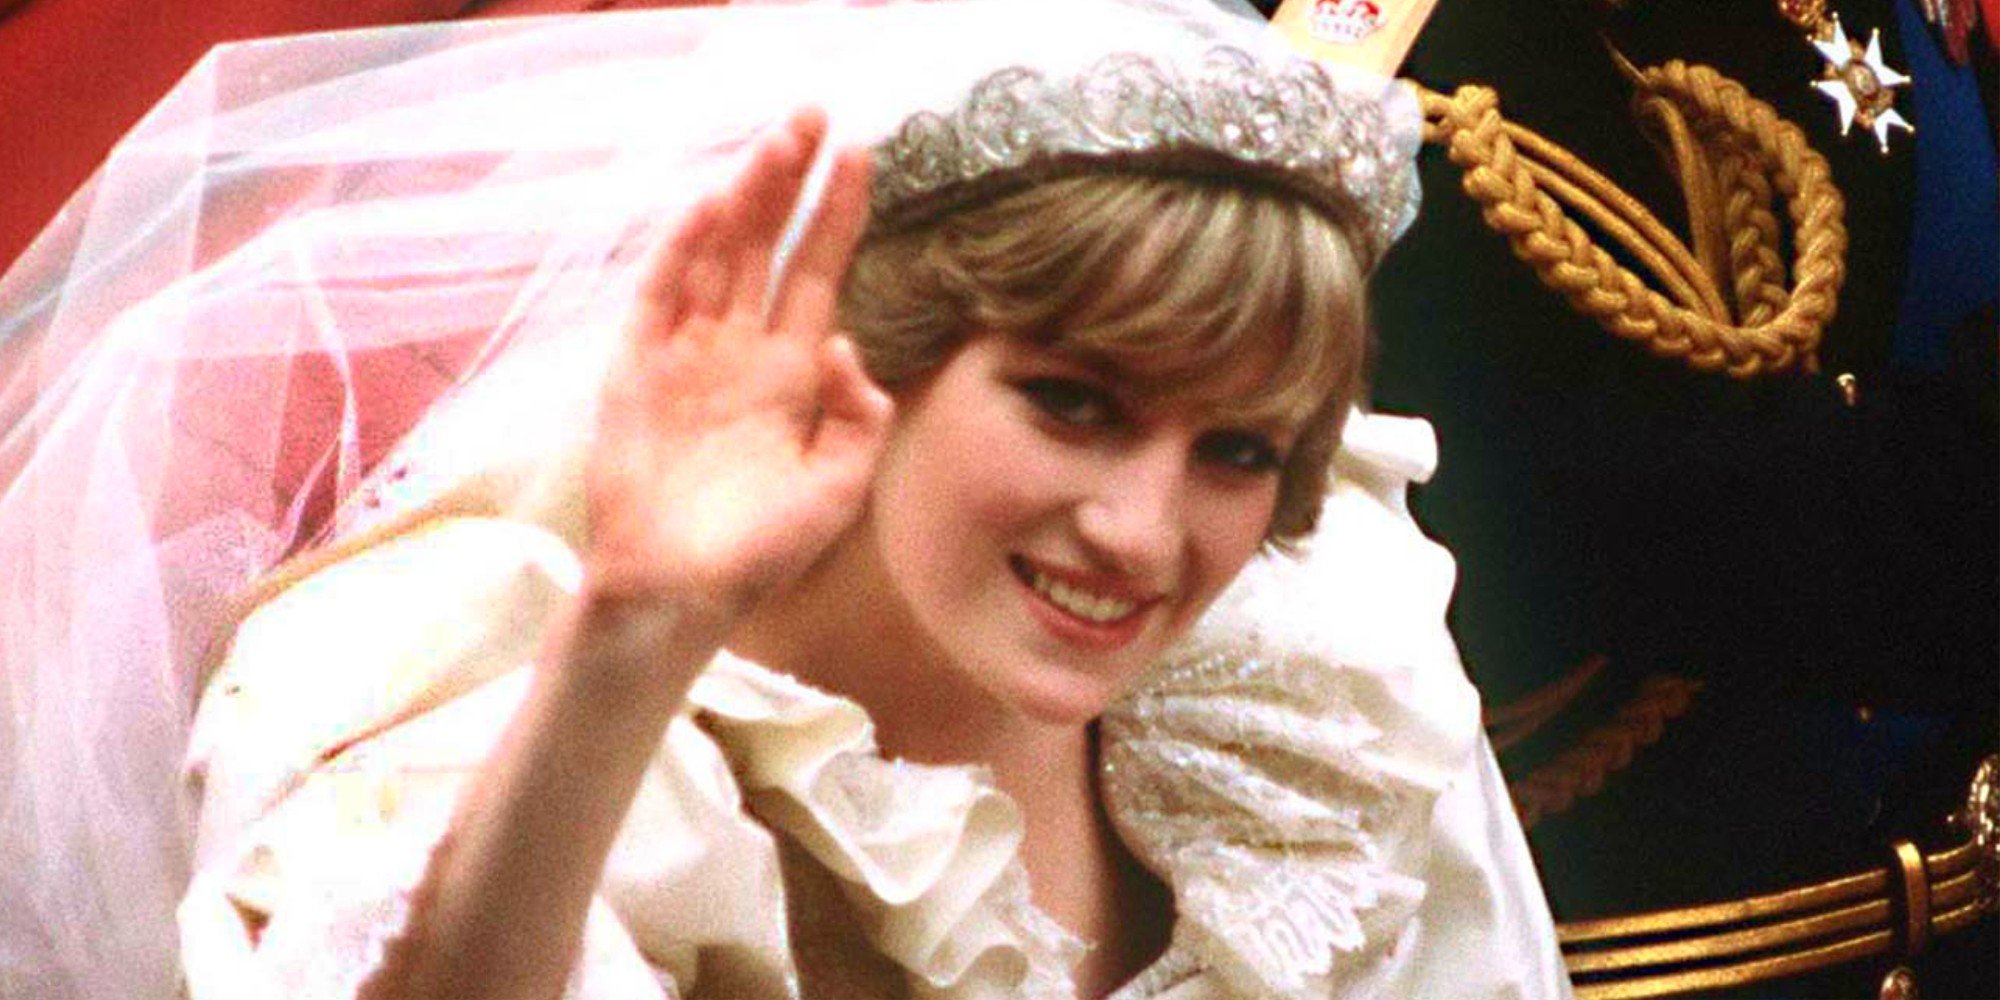 Princess Diana on her wedding day to Prince Charles wearing the Spencer Tiara.